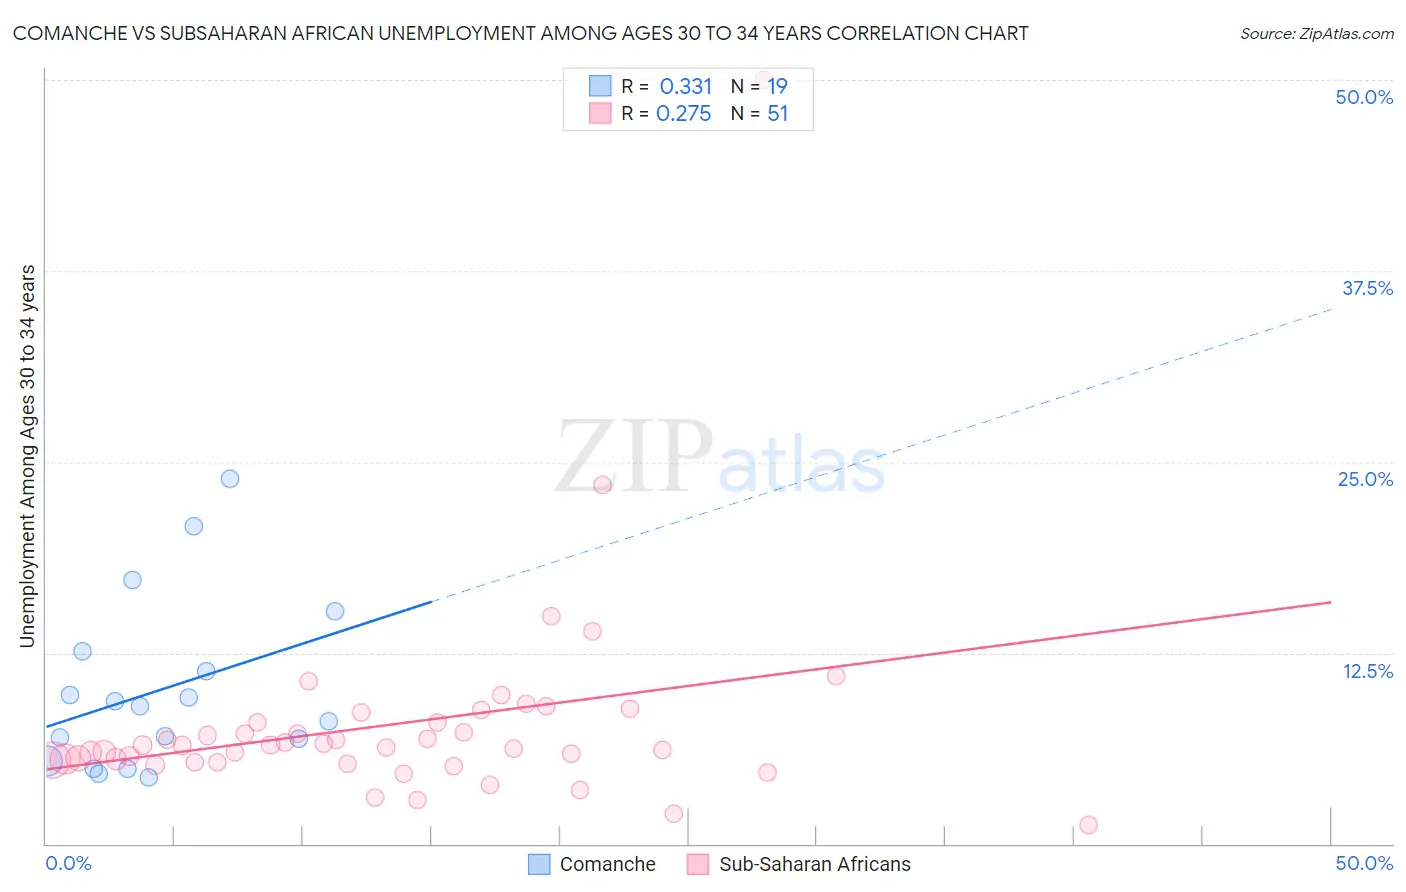 Comanche vs Subsaharan African Unemployment Among Ages 30 to 34 years